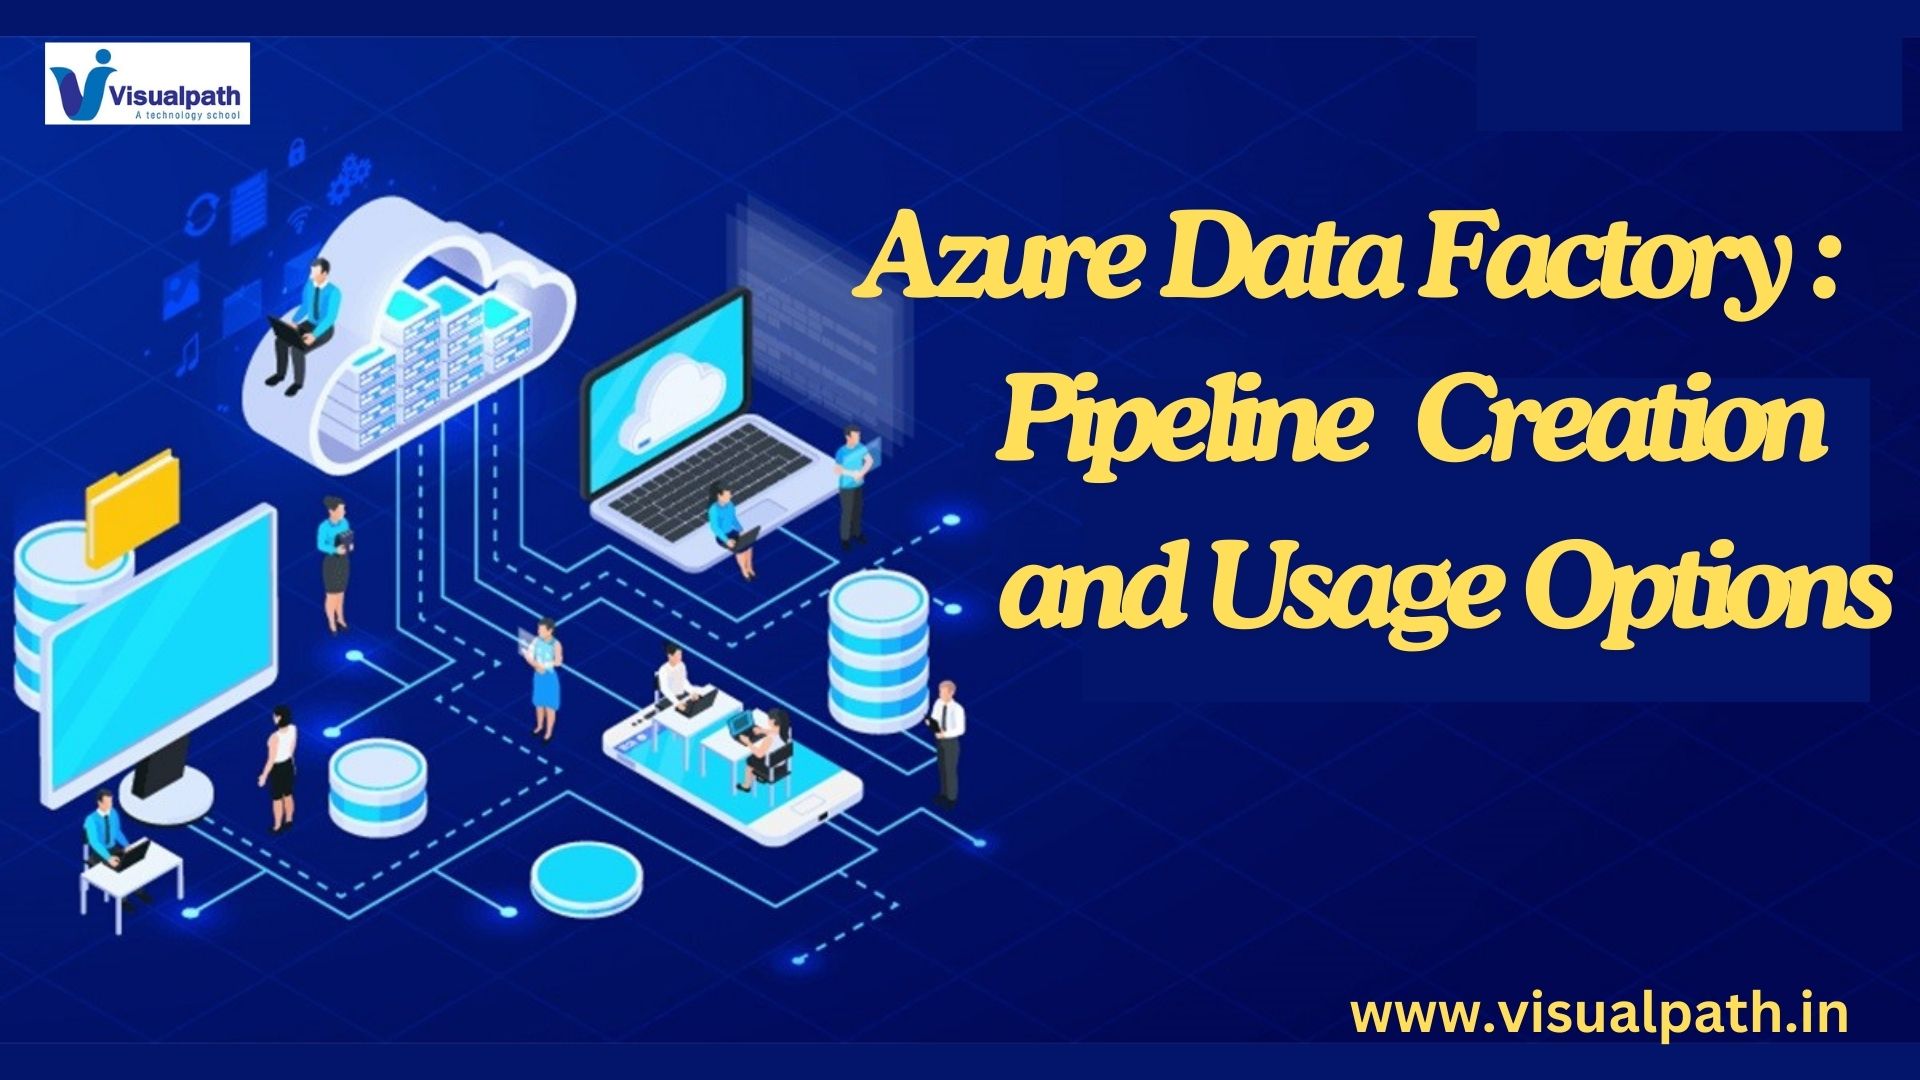 Azure Data Factory? Pipeline Creation and Usage Options